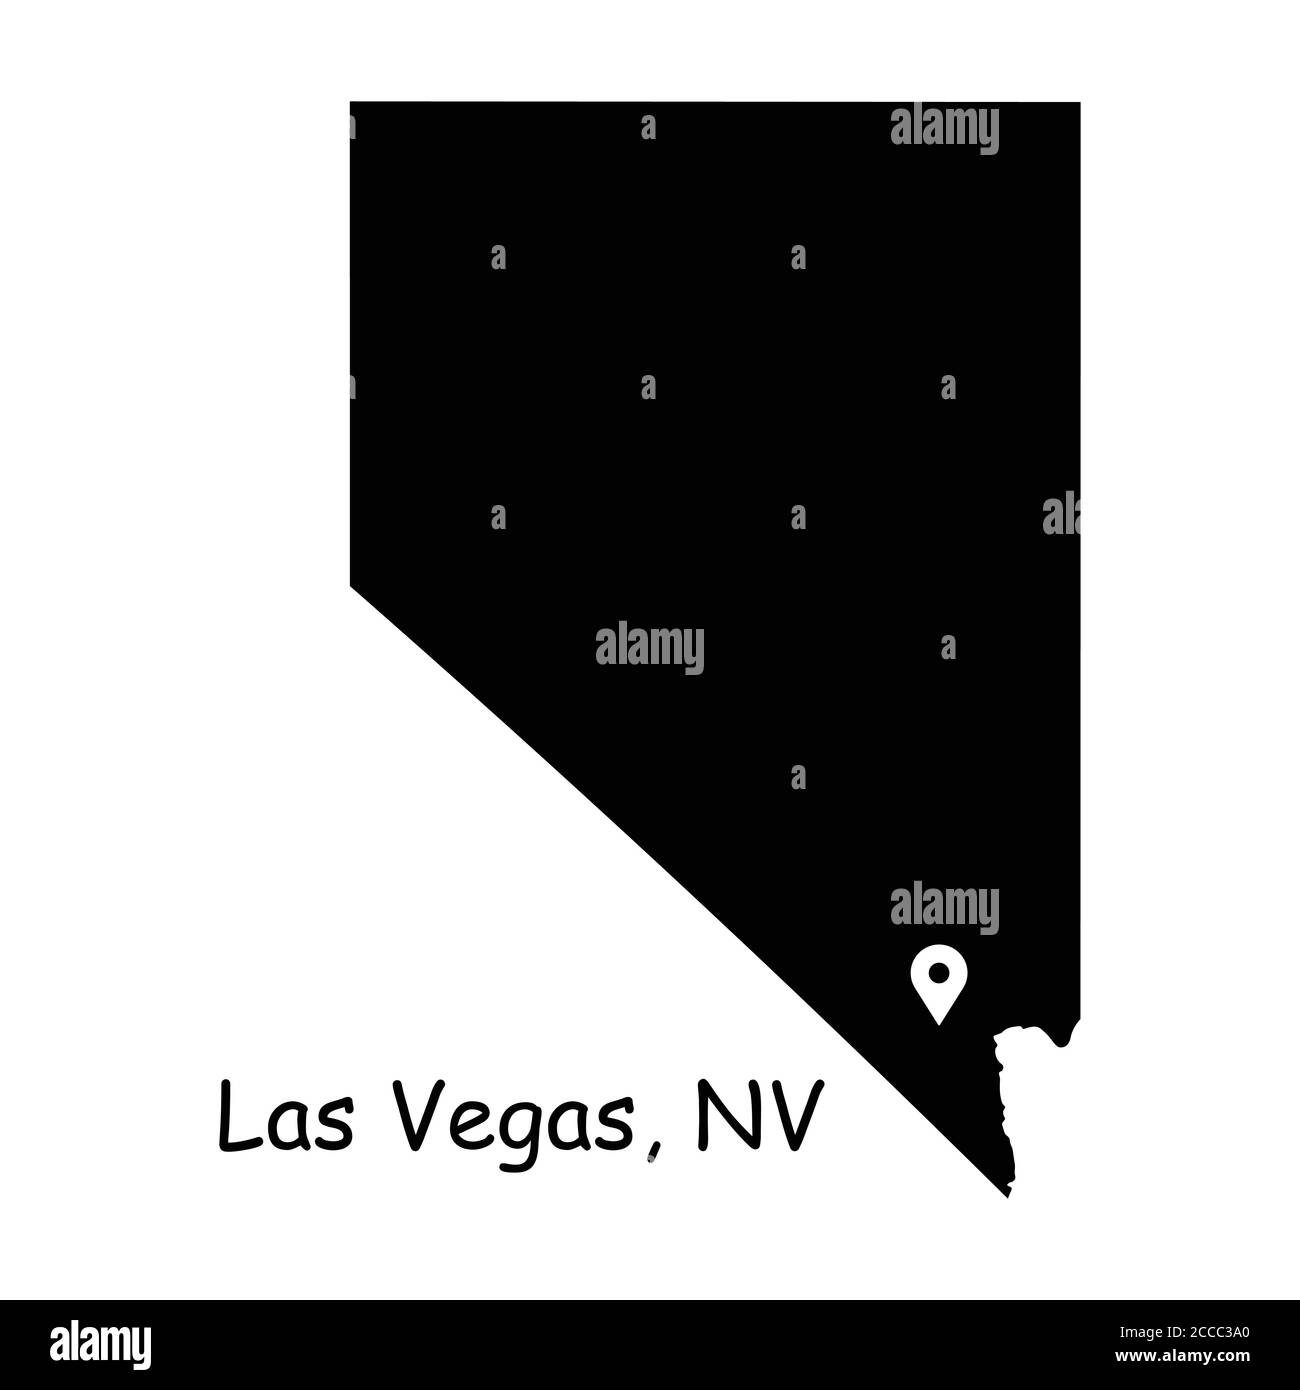 Las Vegas on Nevada State Map. Detailed NV State Map with Location Pin on Las Vegas City. Black silhouette vector map isolated on white background. Stock Vector